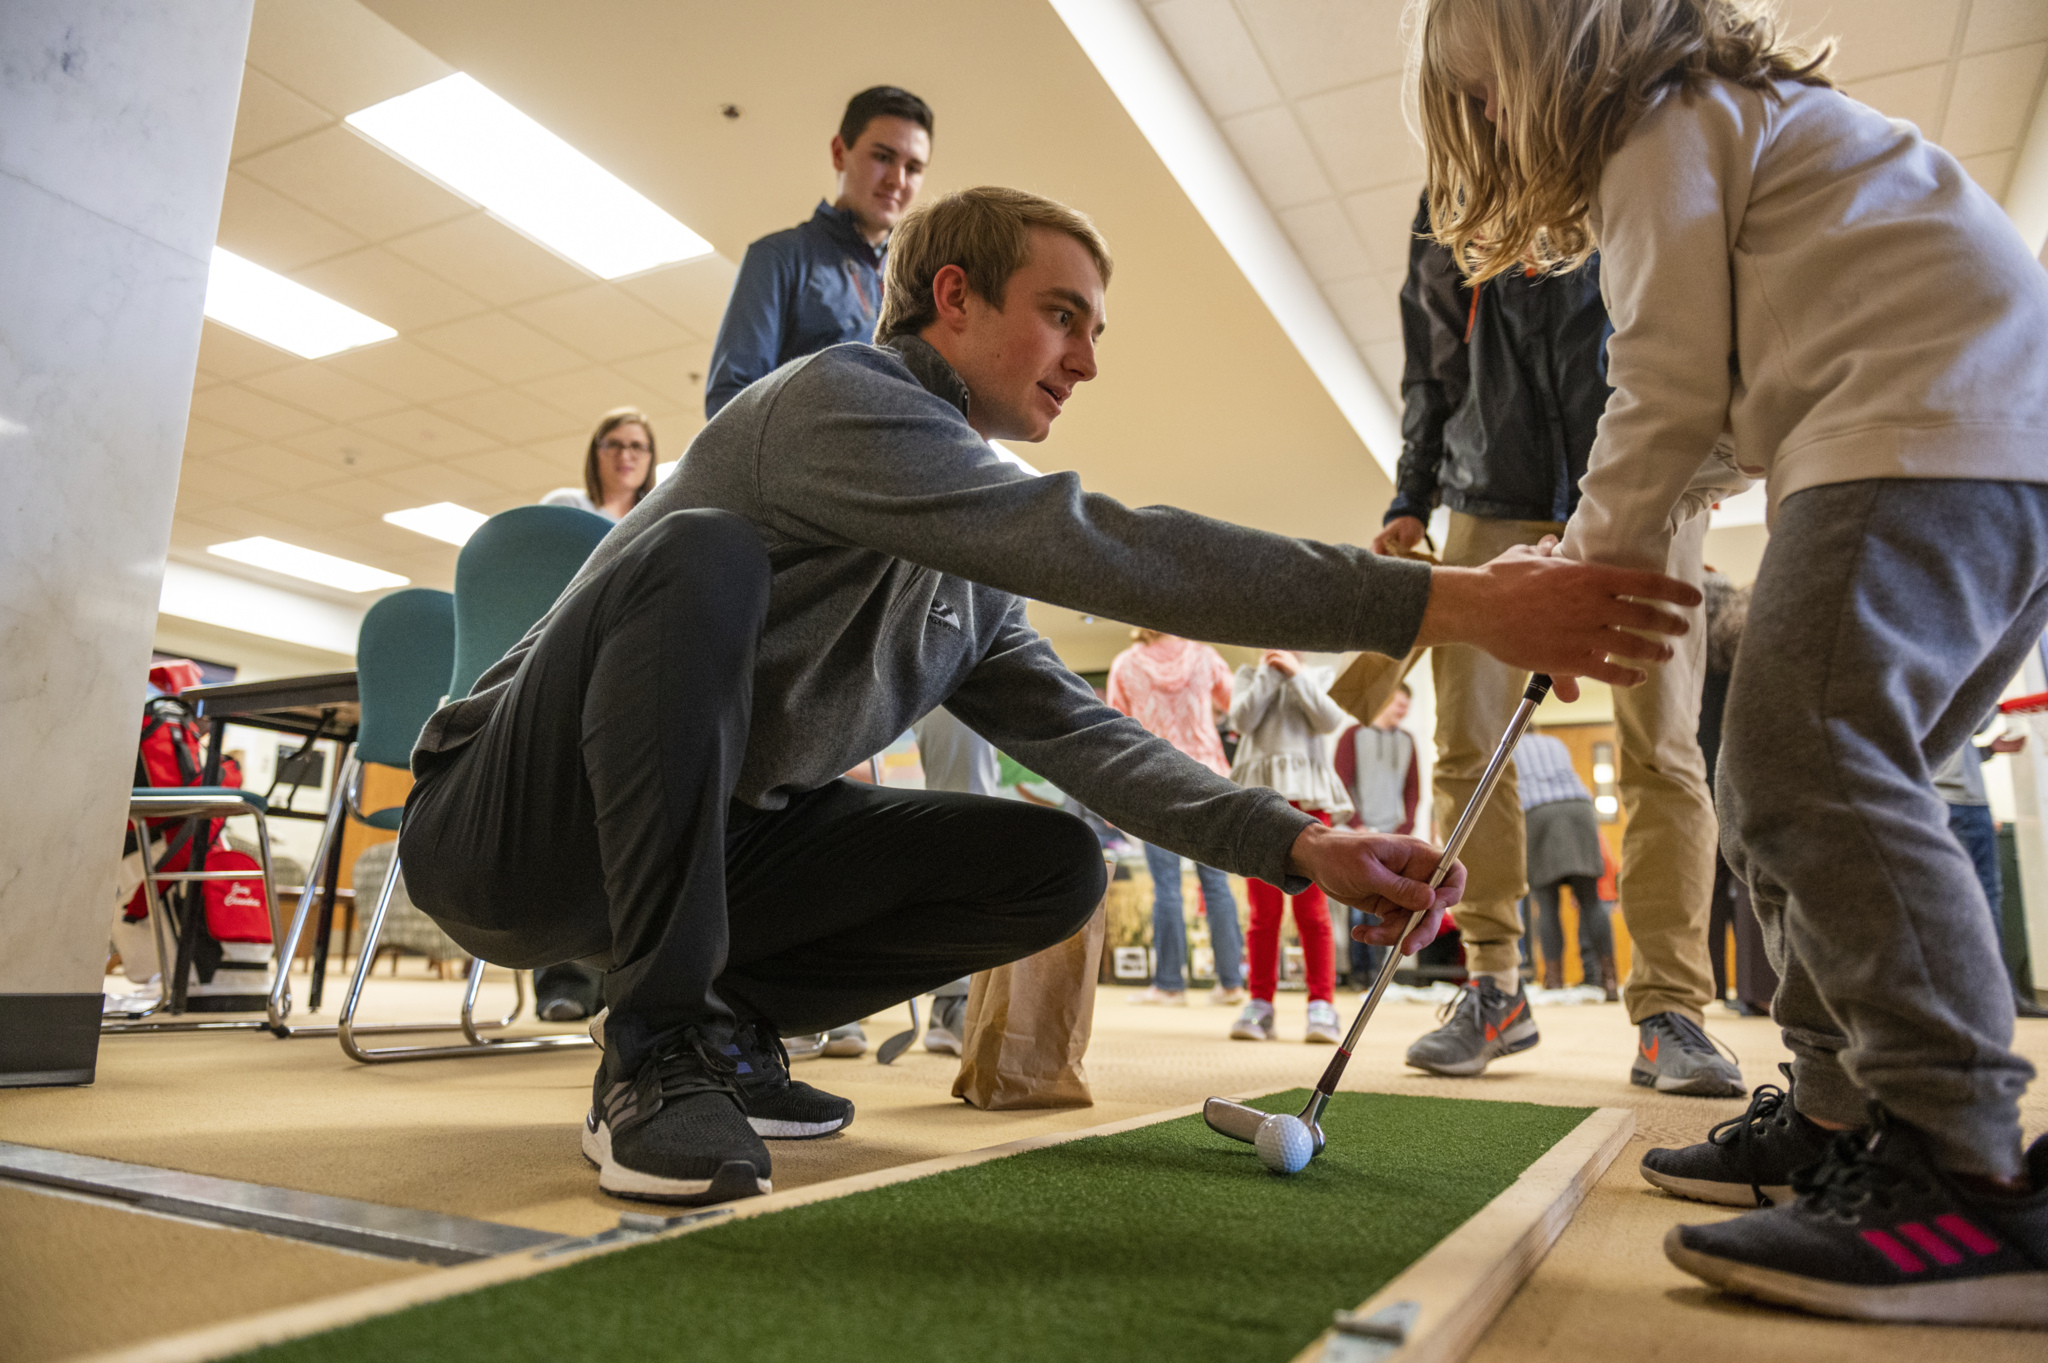 A professional golf management student demonstrates proper putting techniques to a child during CASNR Community night